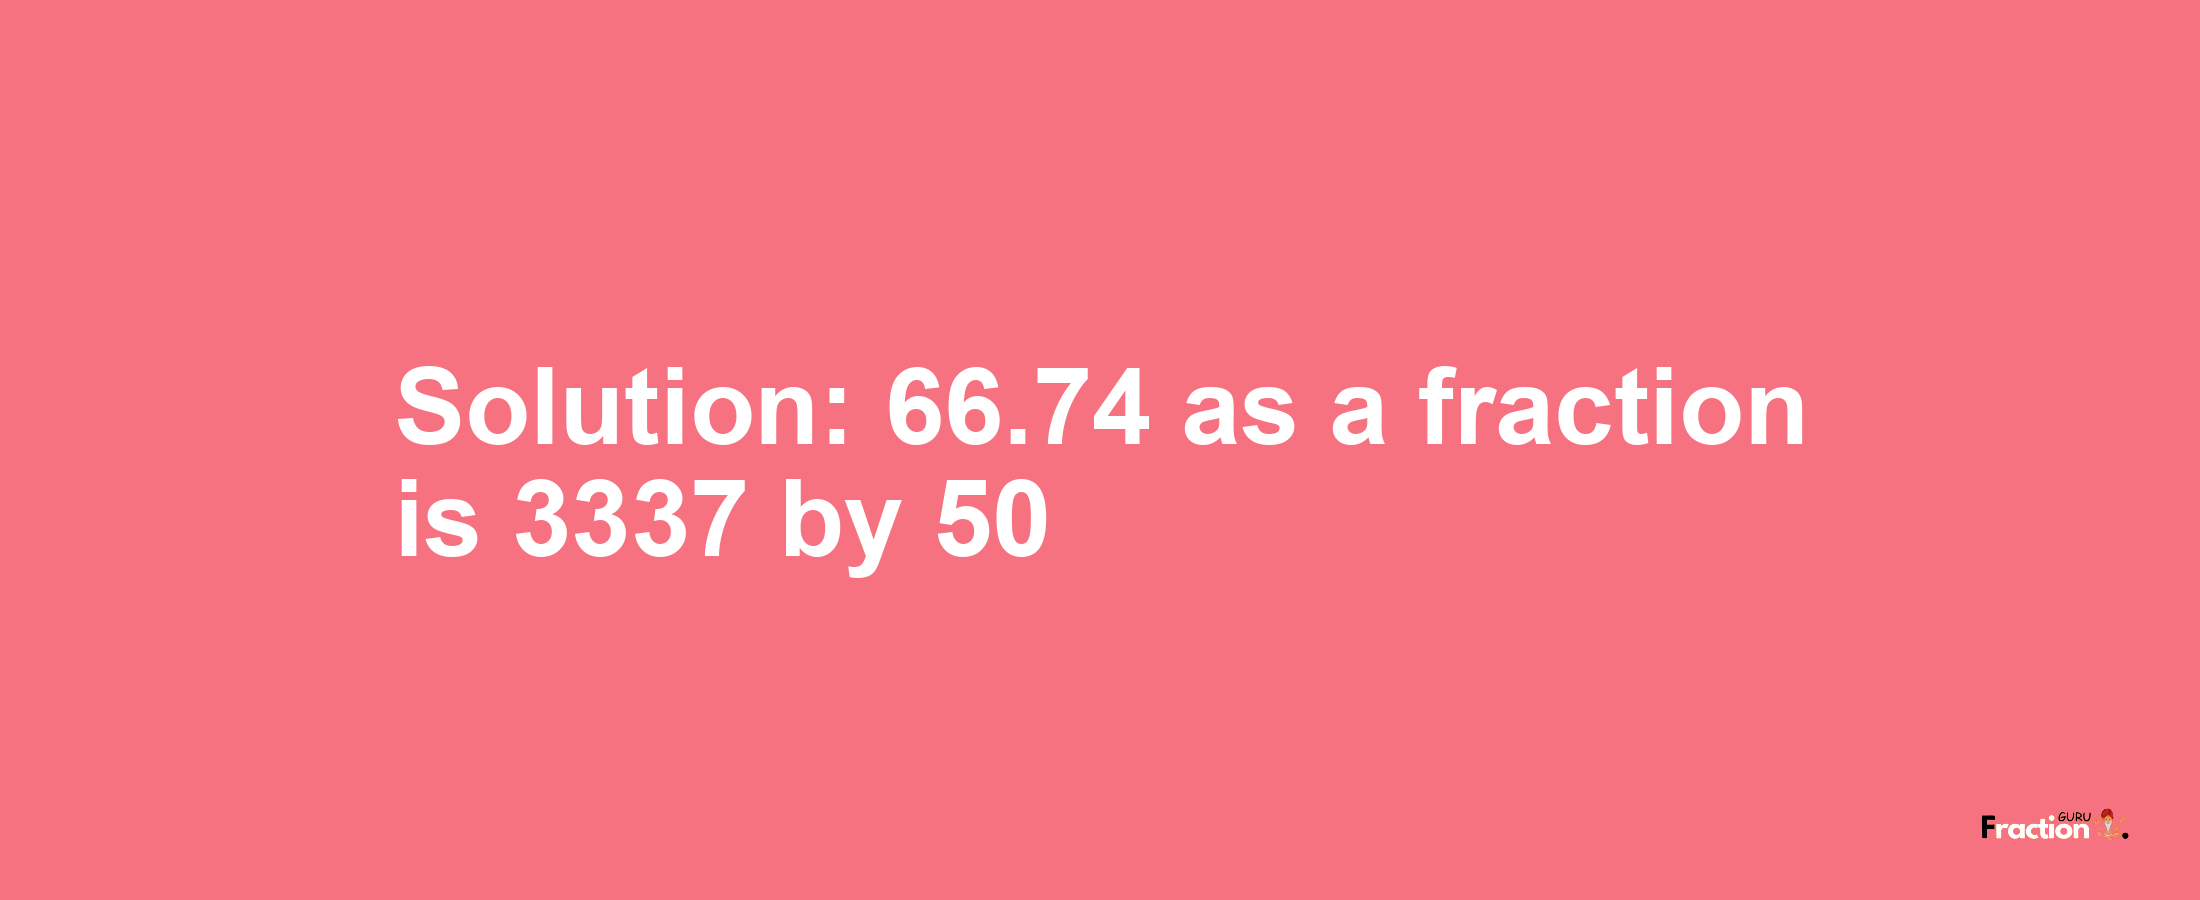 Solution:66.74 as a fraction is 3337/50